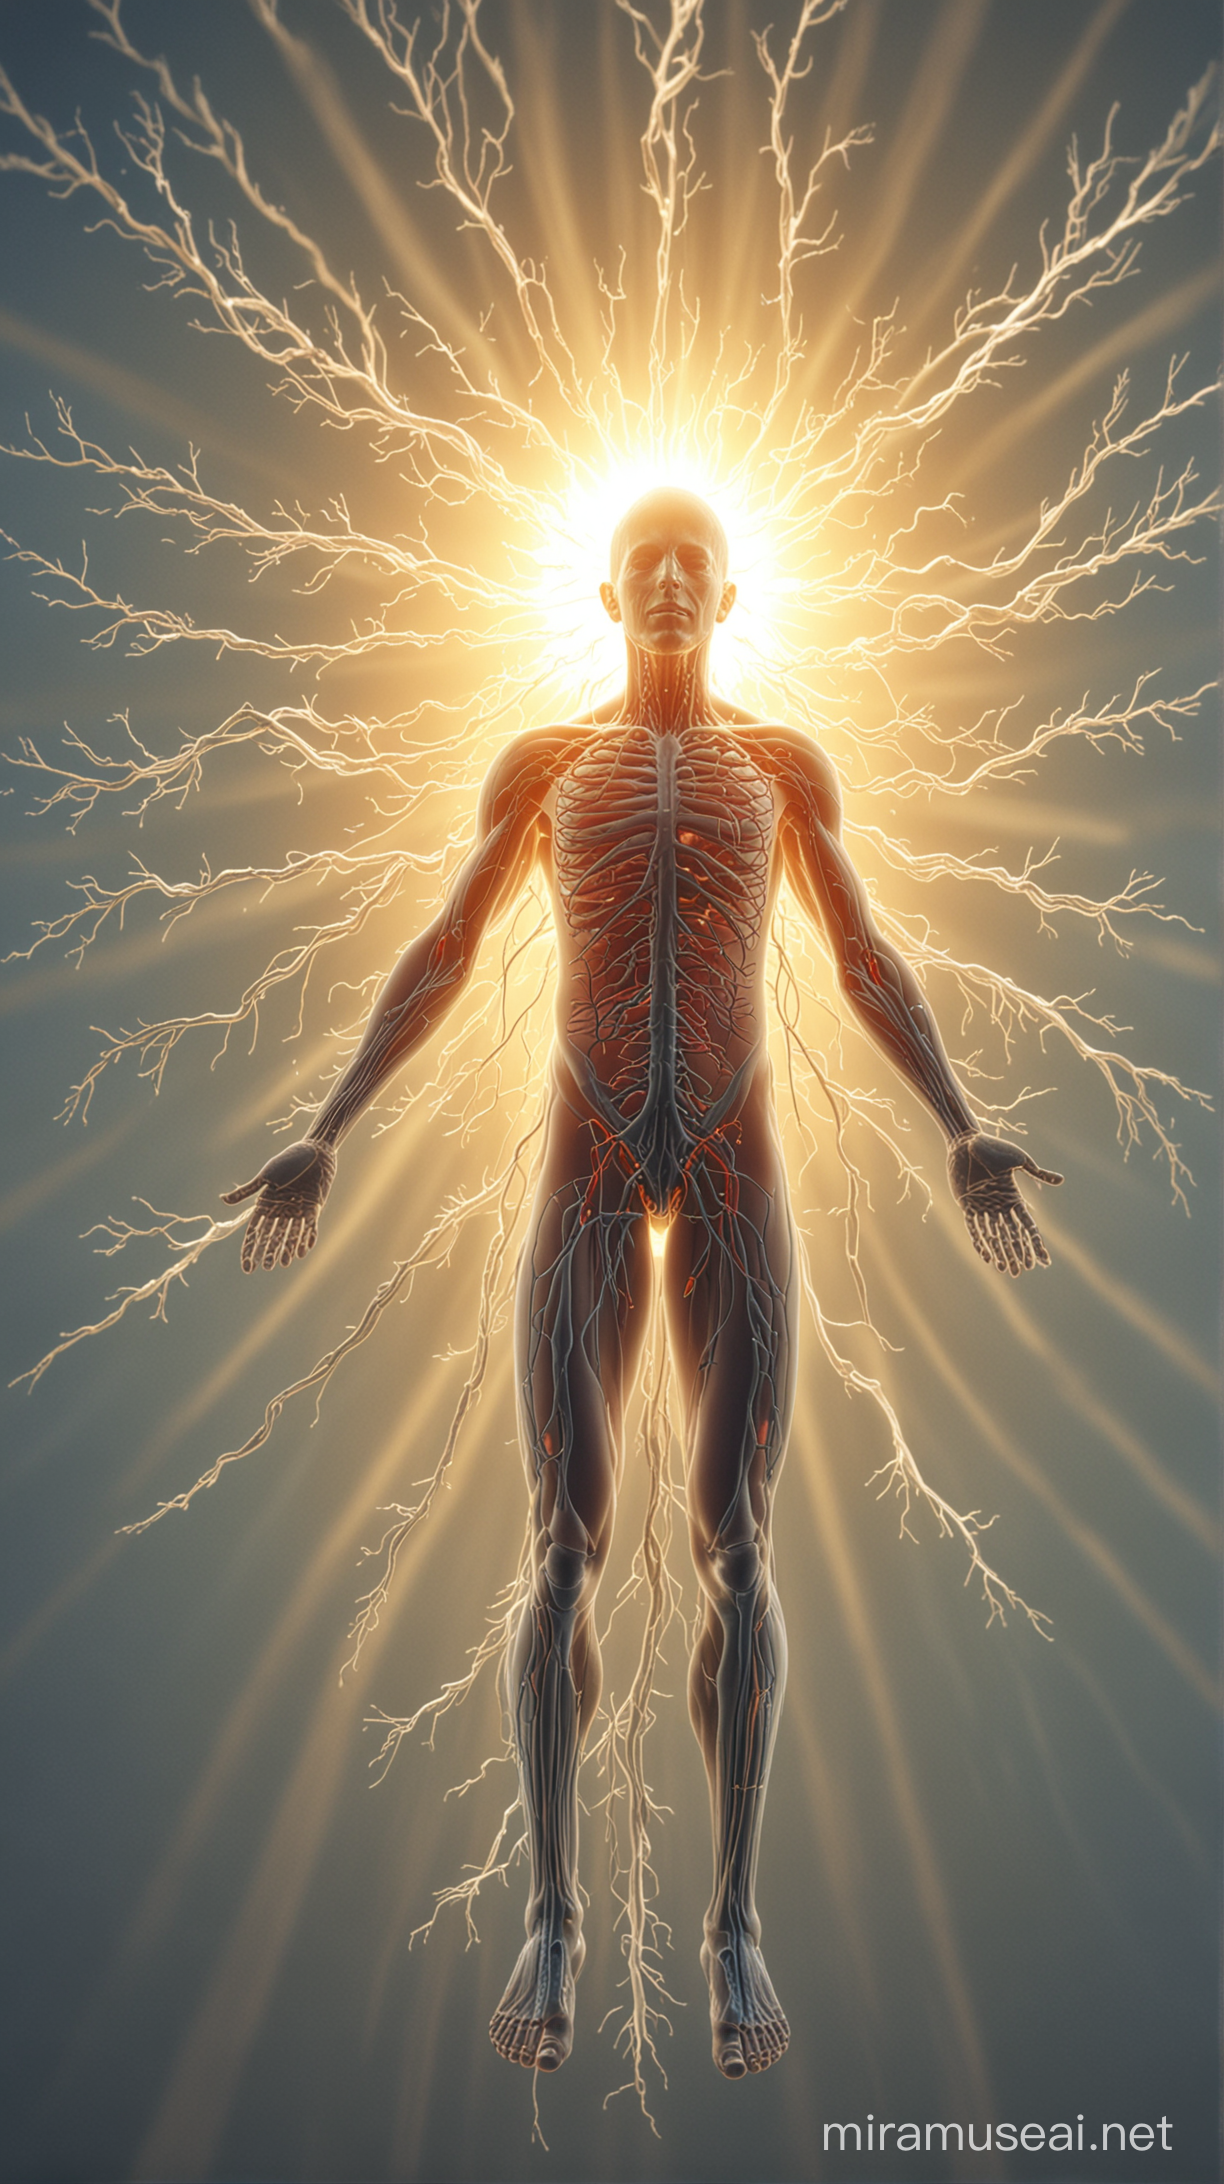 Human Nervous System in Sunlight Neurological Harmony in Natural Ambiance